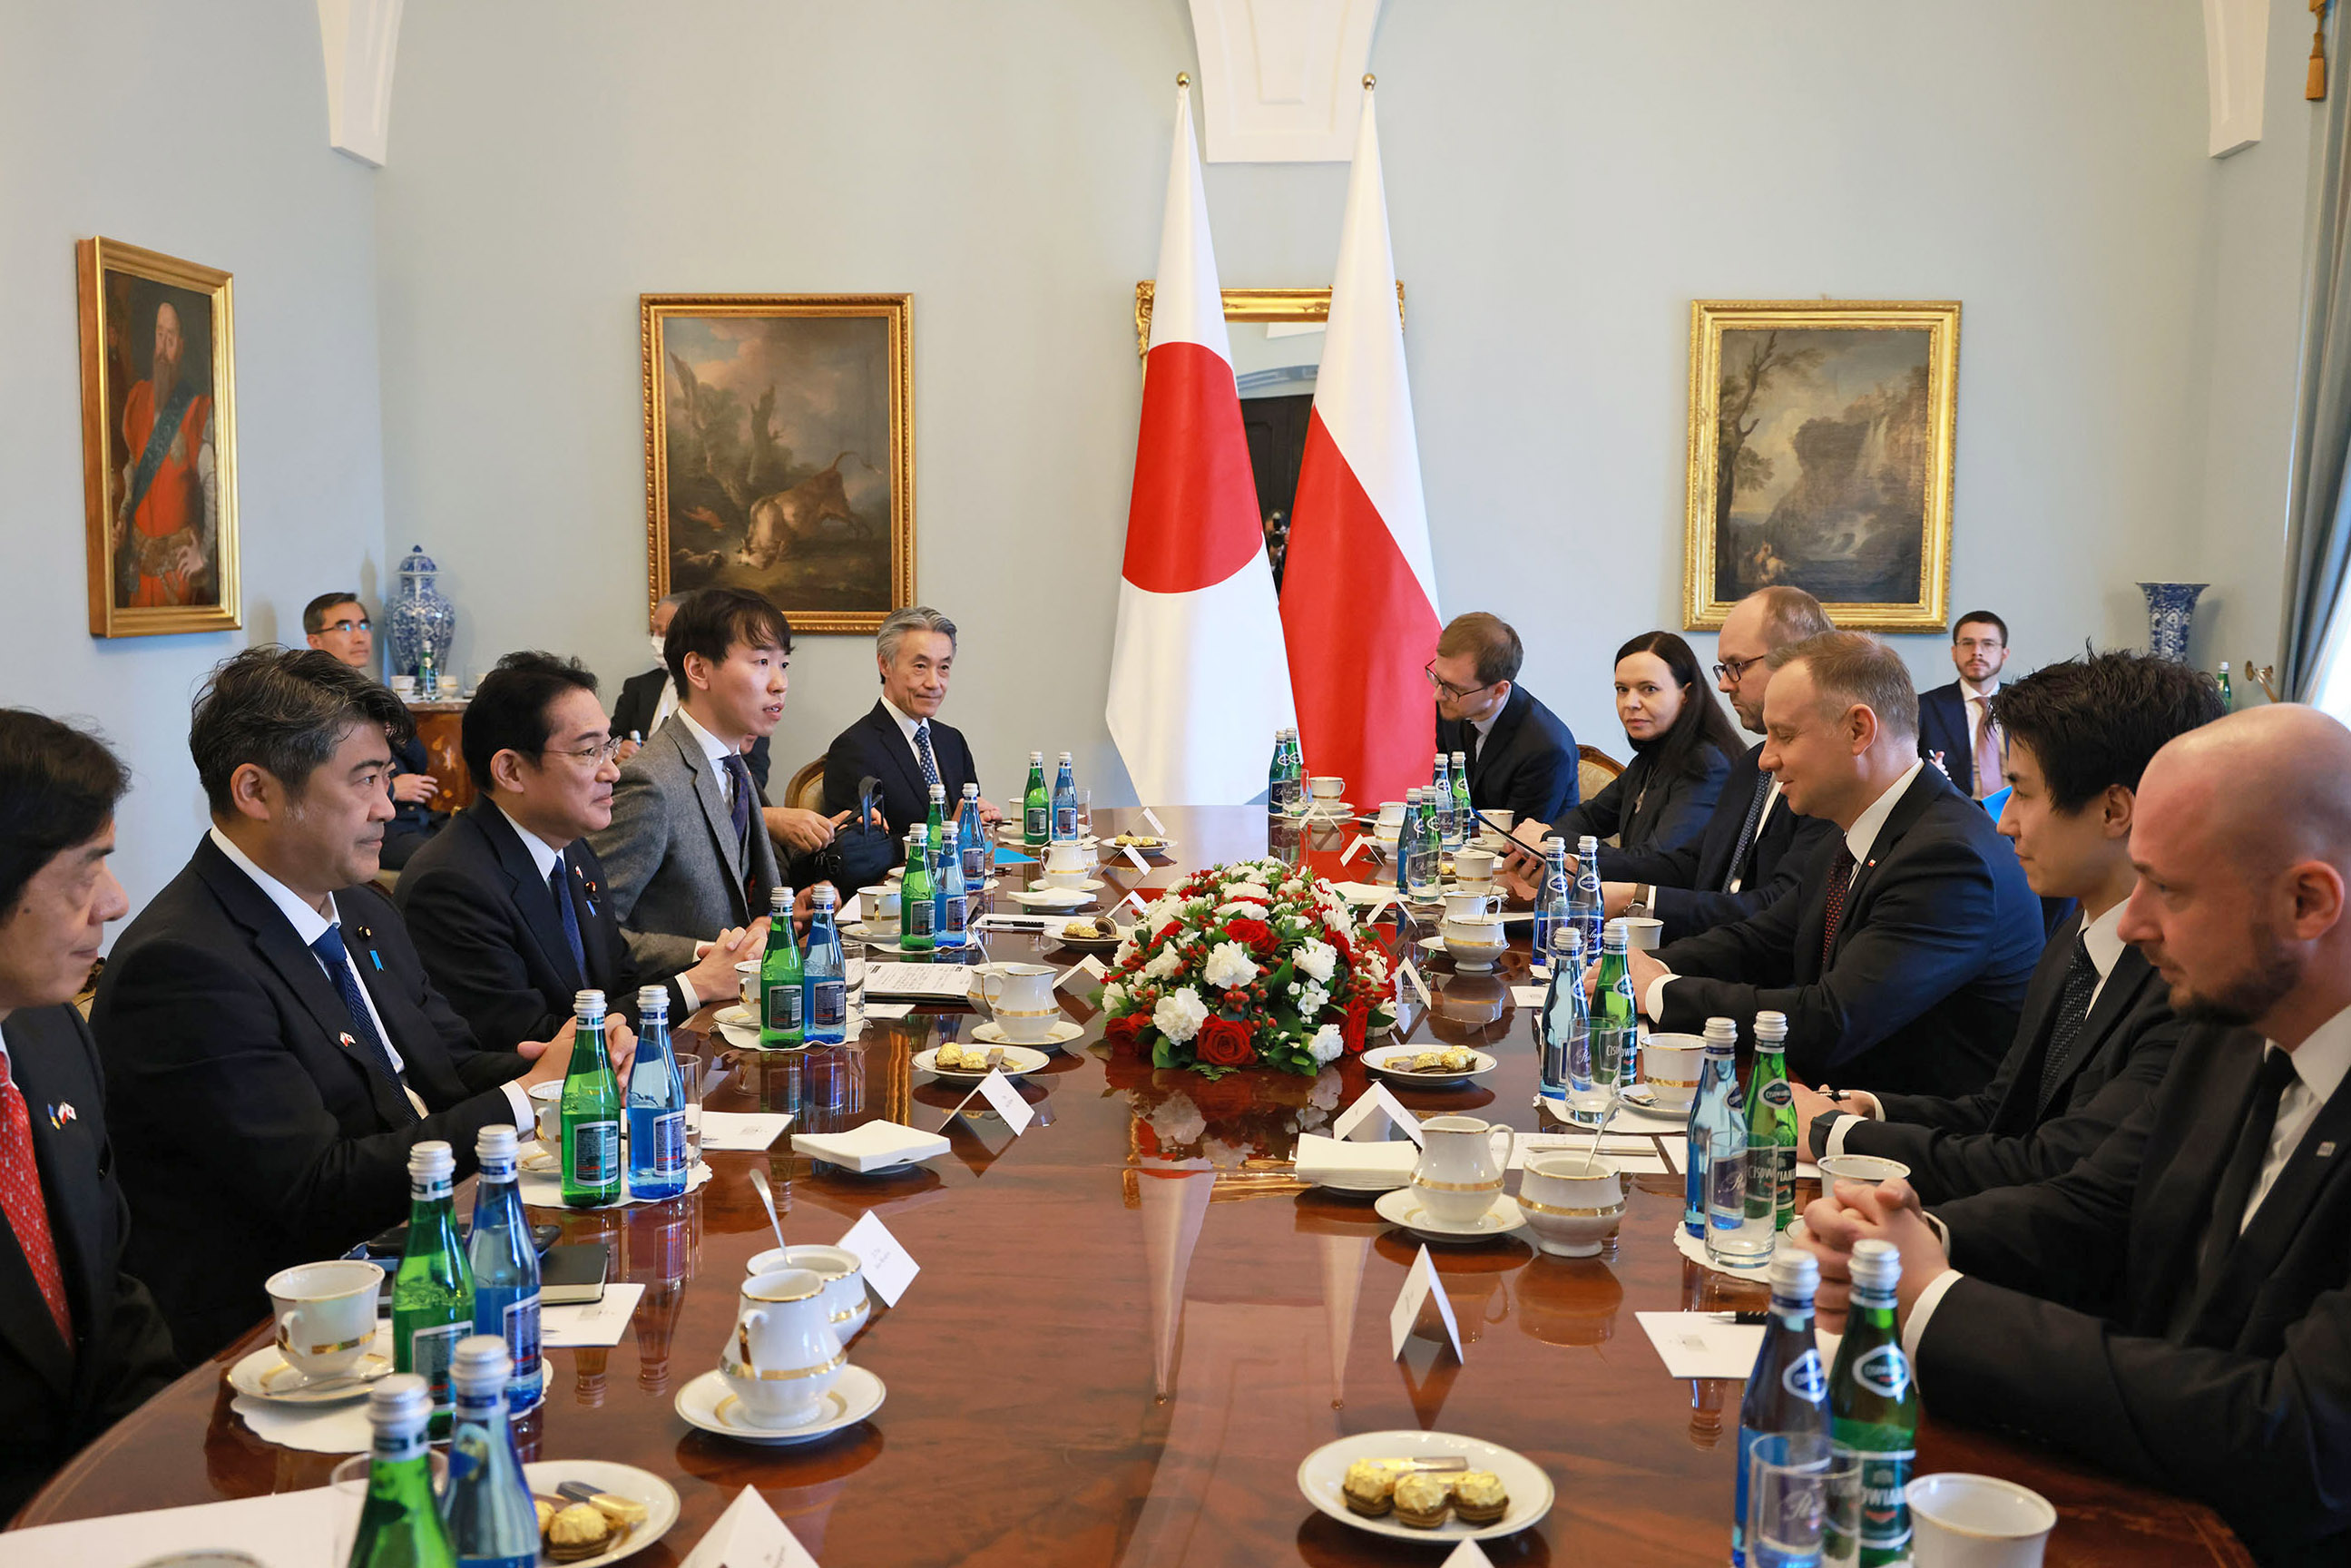 Prime Minister Kishida holding a meeting with President Duda